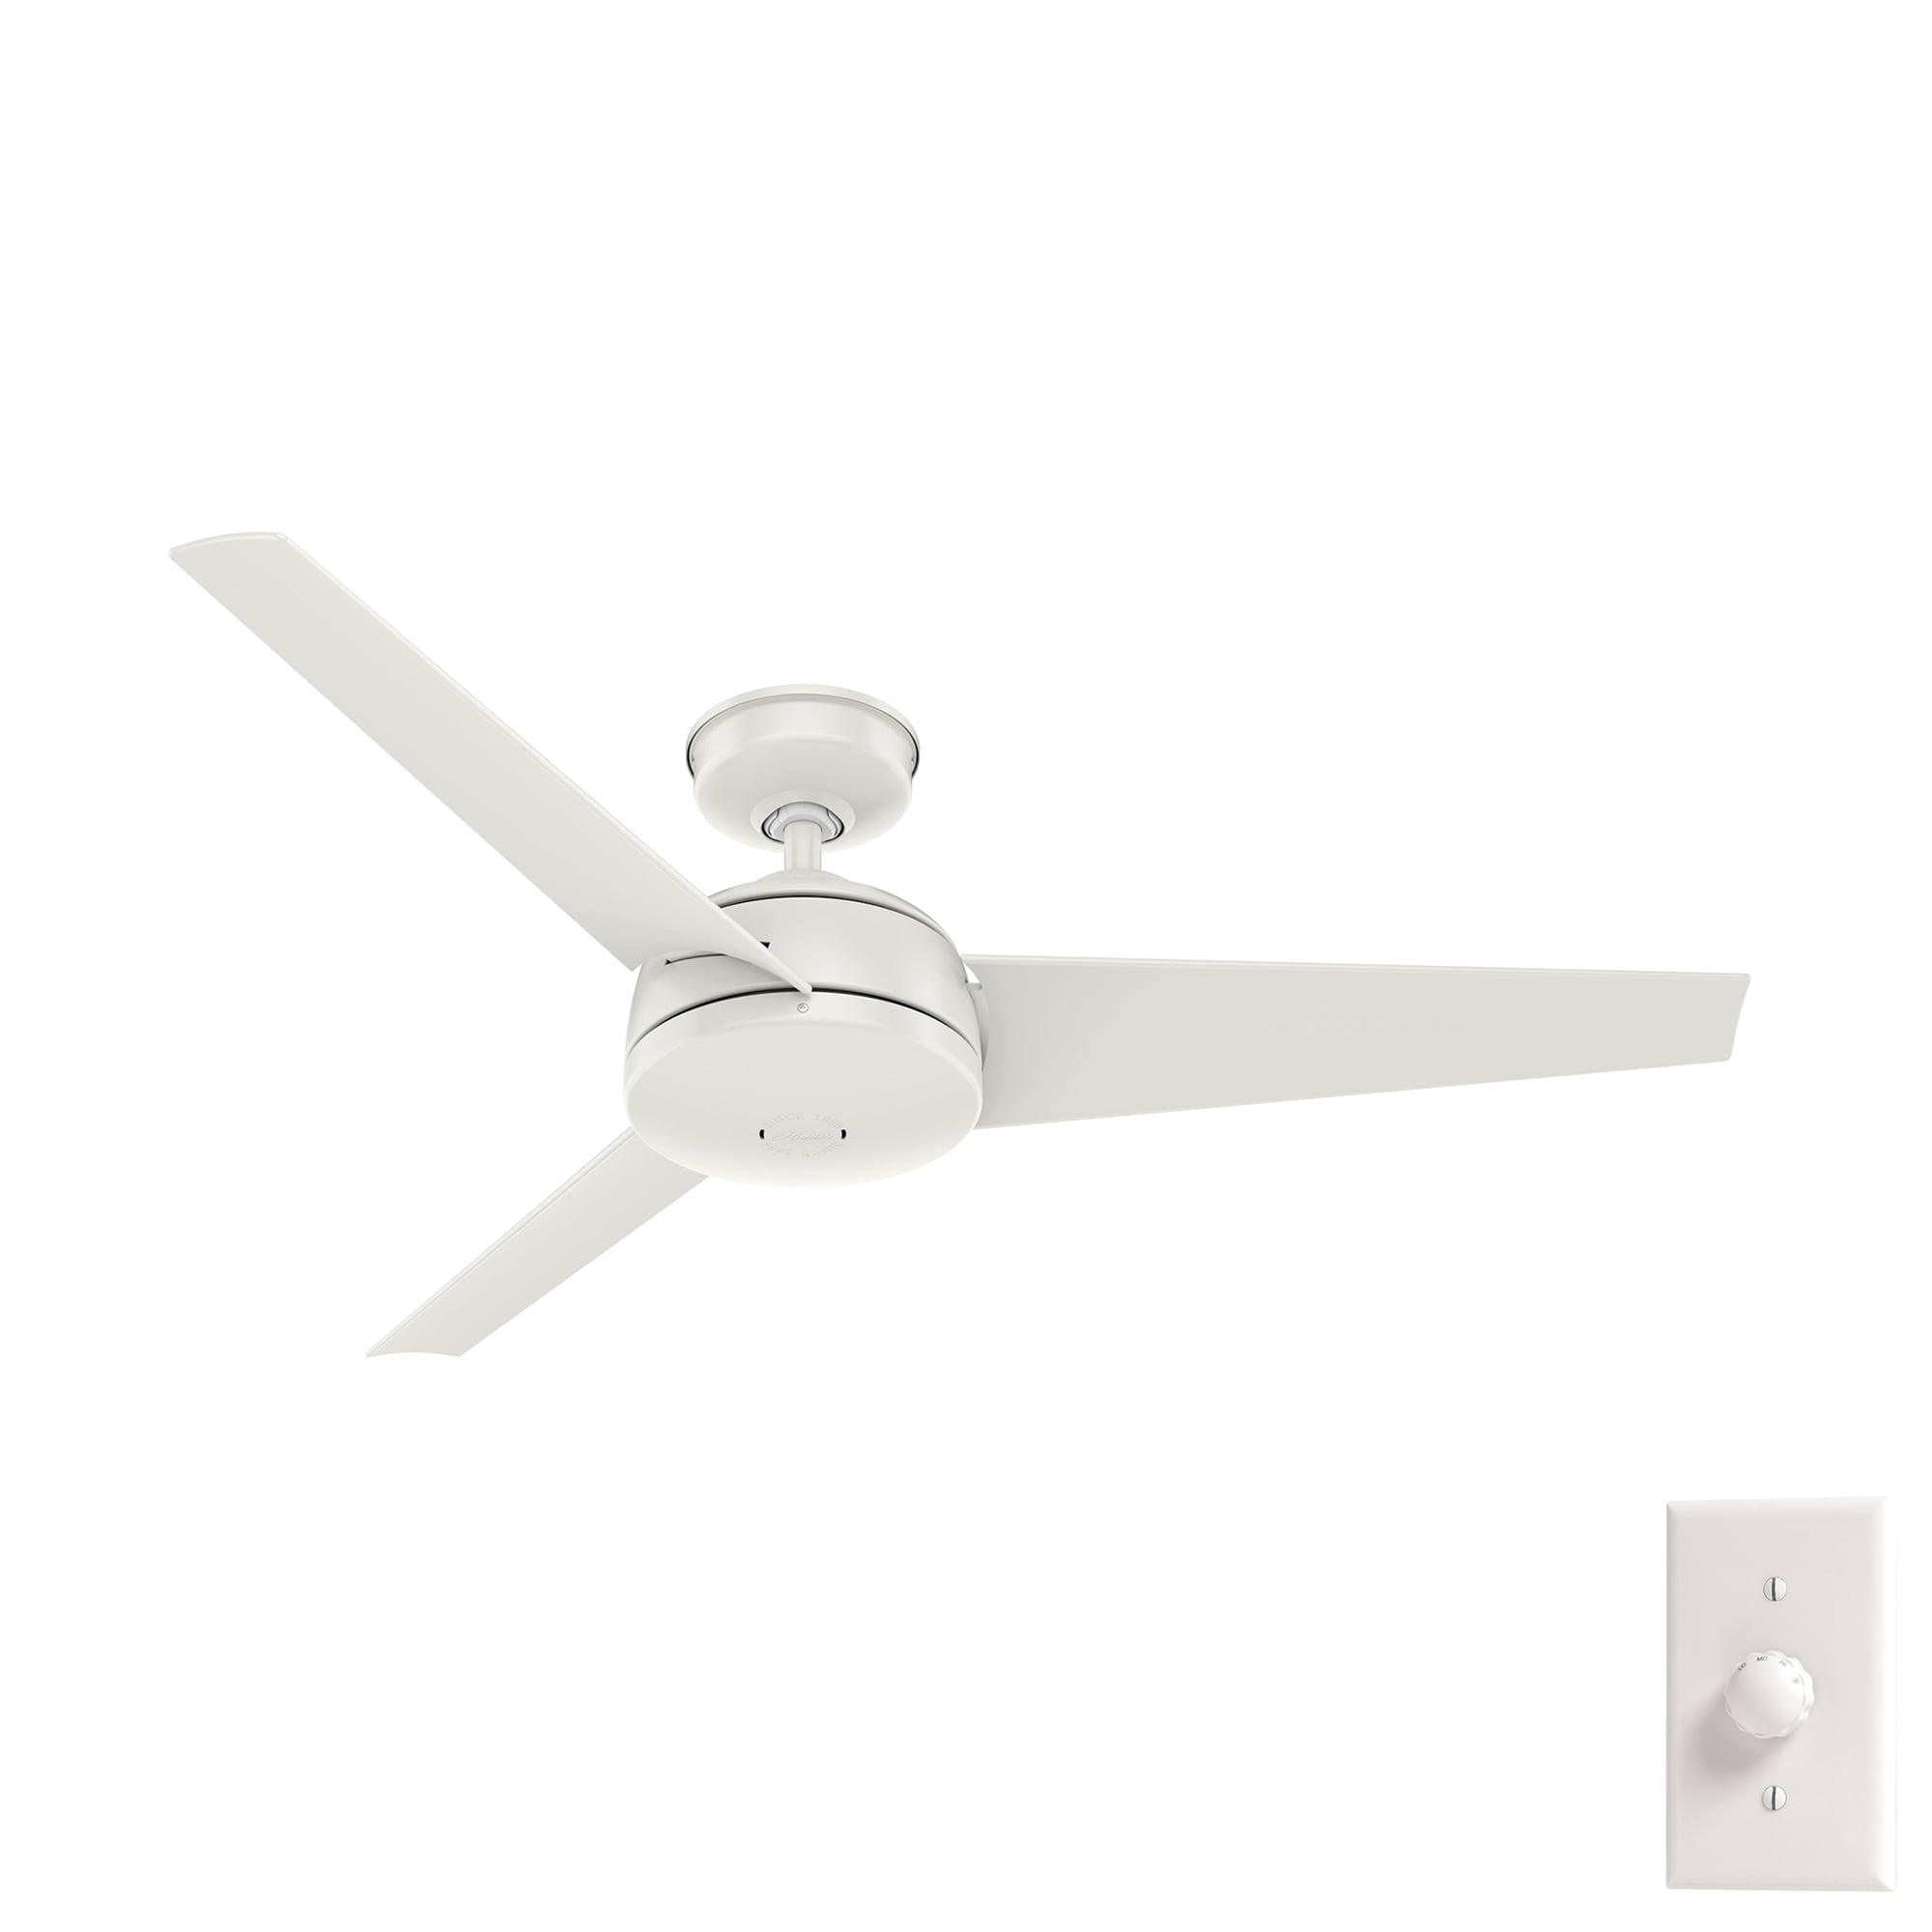 Ceiling fan black with pull switch 3-light - Mistral Vidro